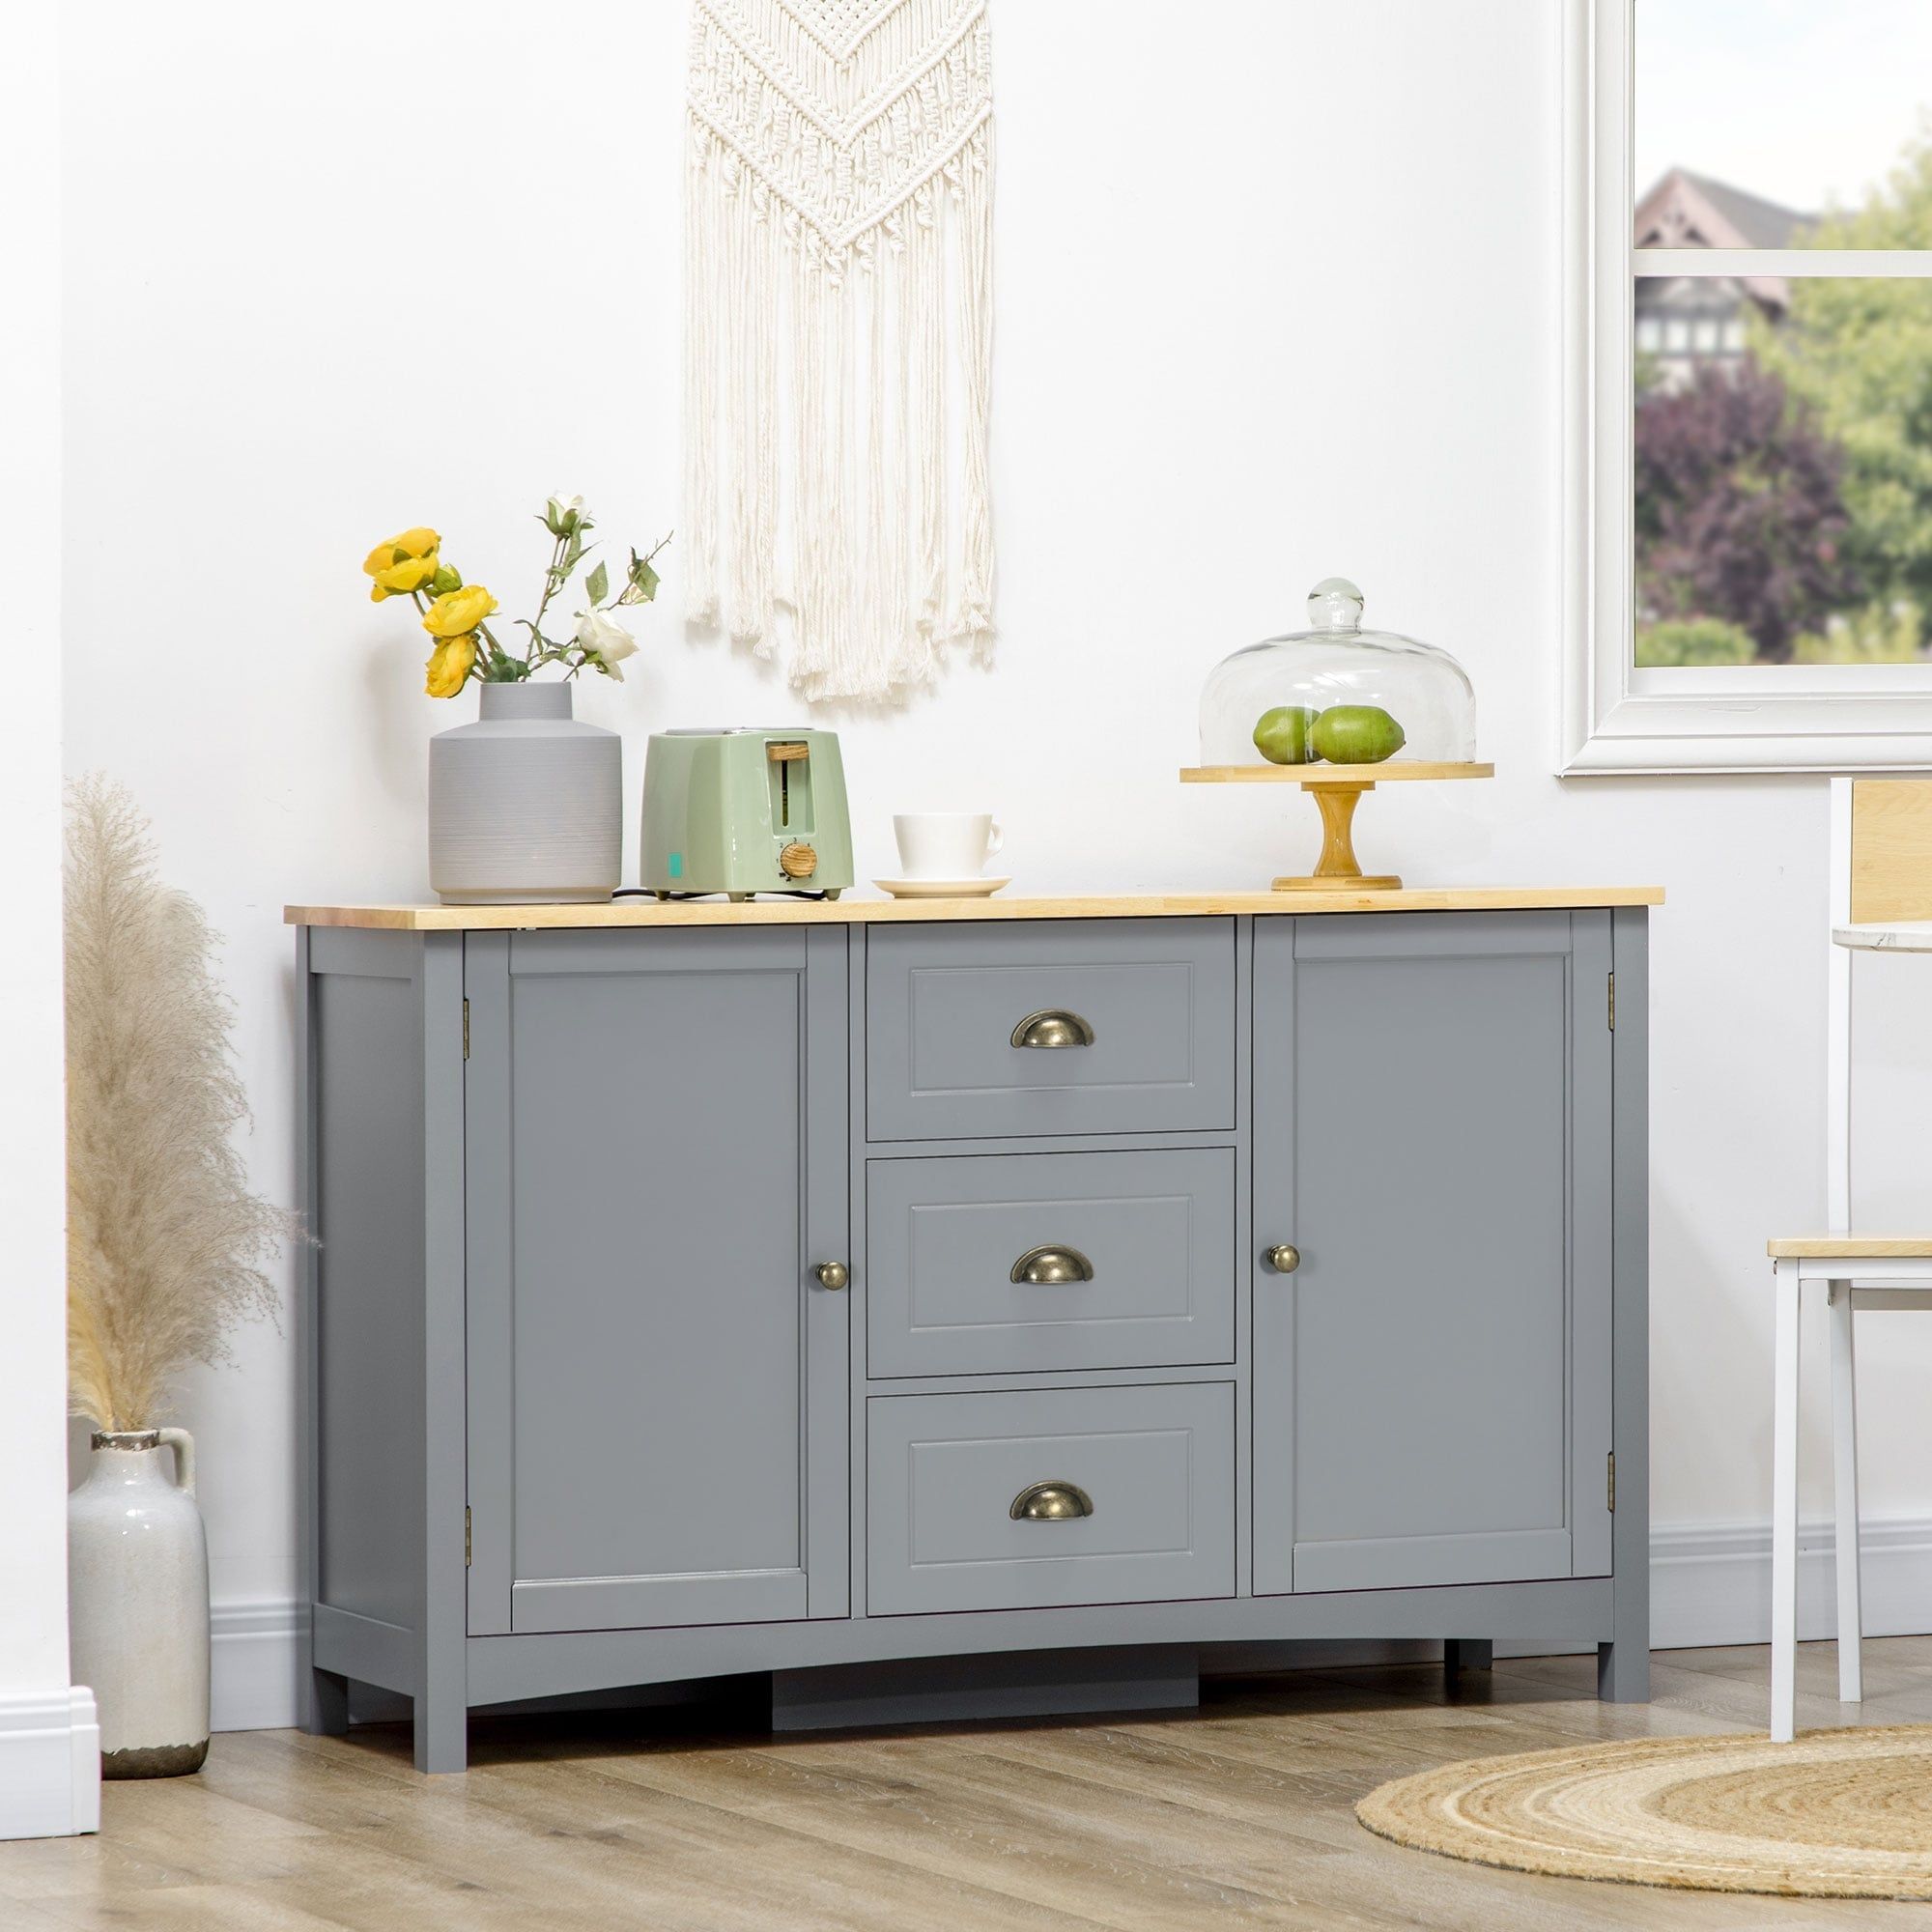 Homcom Sideboard Buffet Cabinet, Retro Kitchen Cabinet, Coffee Bar Cabinet  With Rubber Wood Top, Drawers, Entryway, Gray – Bed Bath & Beyond – 38858360 Throughout Most Up To Date Sideboards With Rubberwood Top (Photo 8 of 15)